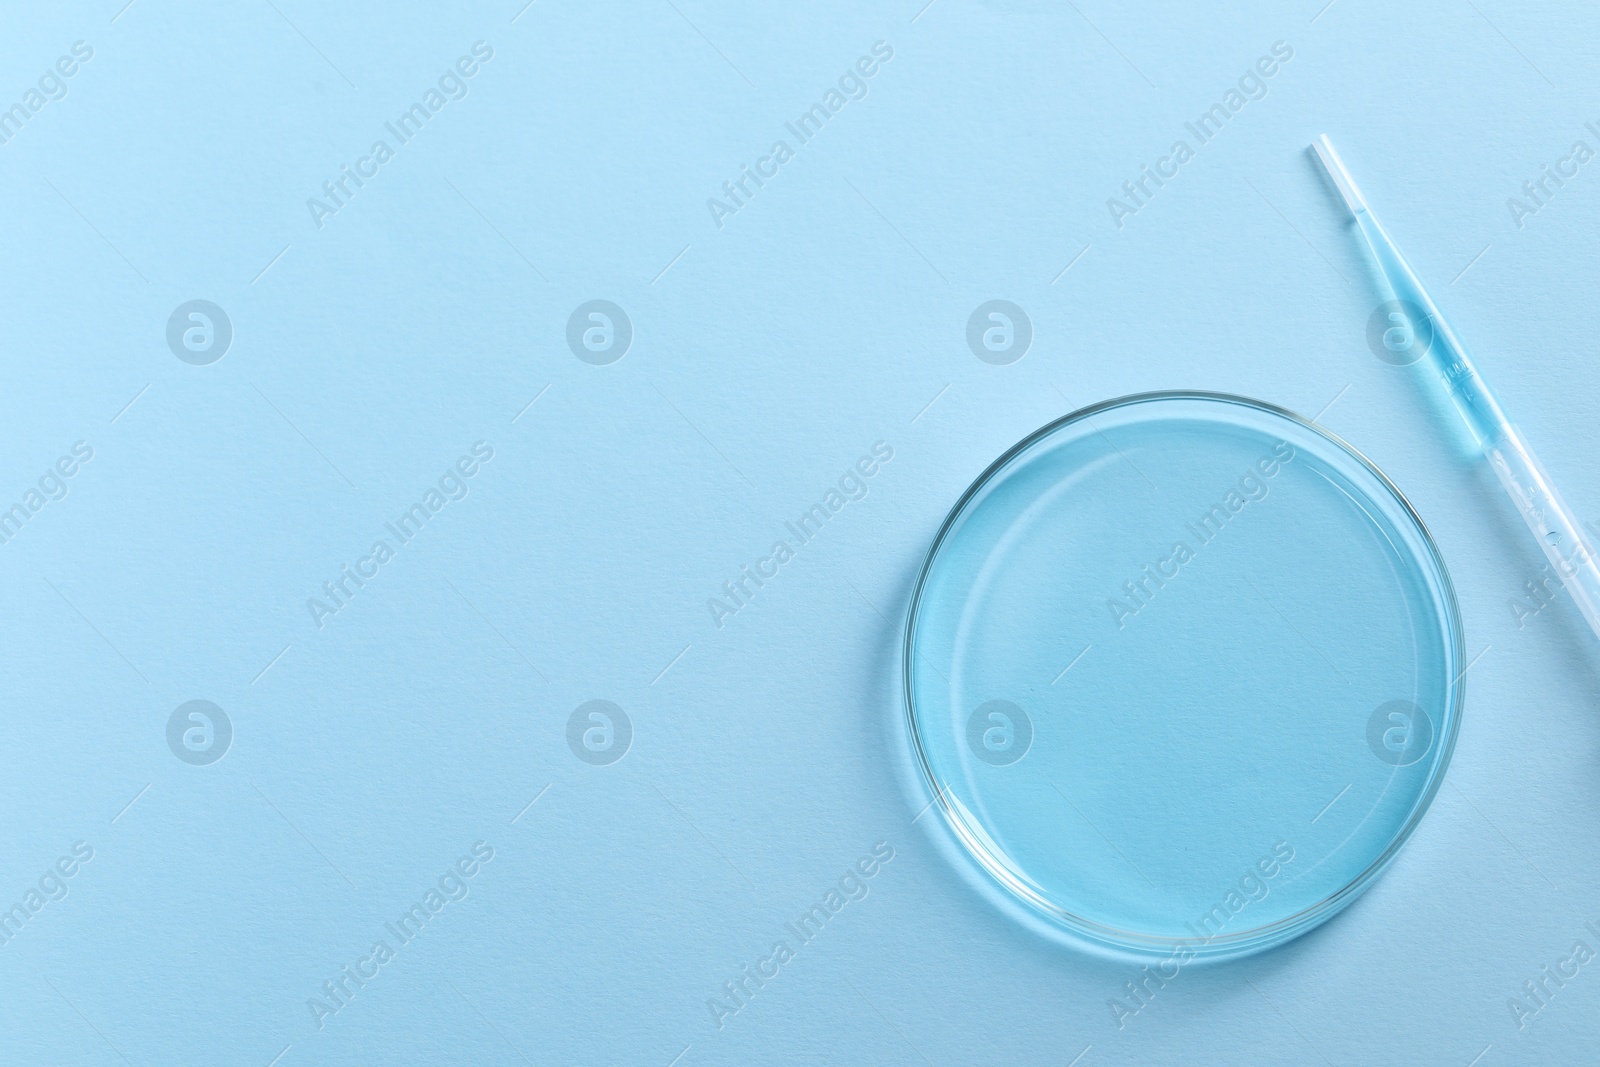 Photo of Transfer pipette and petri dish on light blue background, top view. Space for text